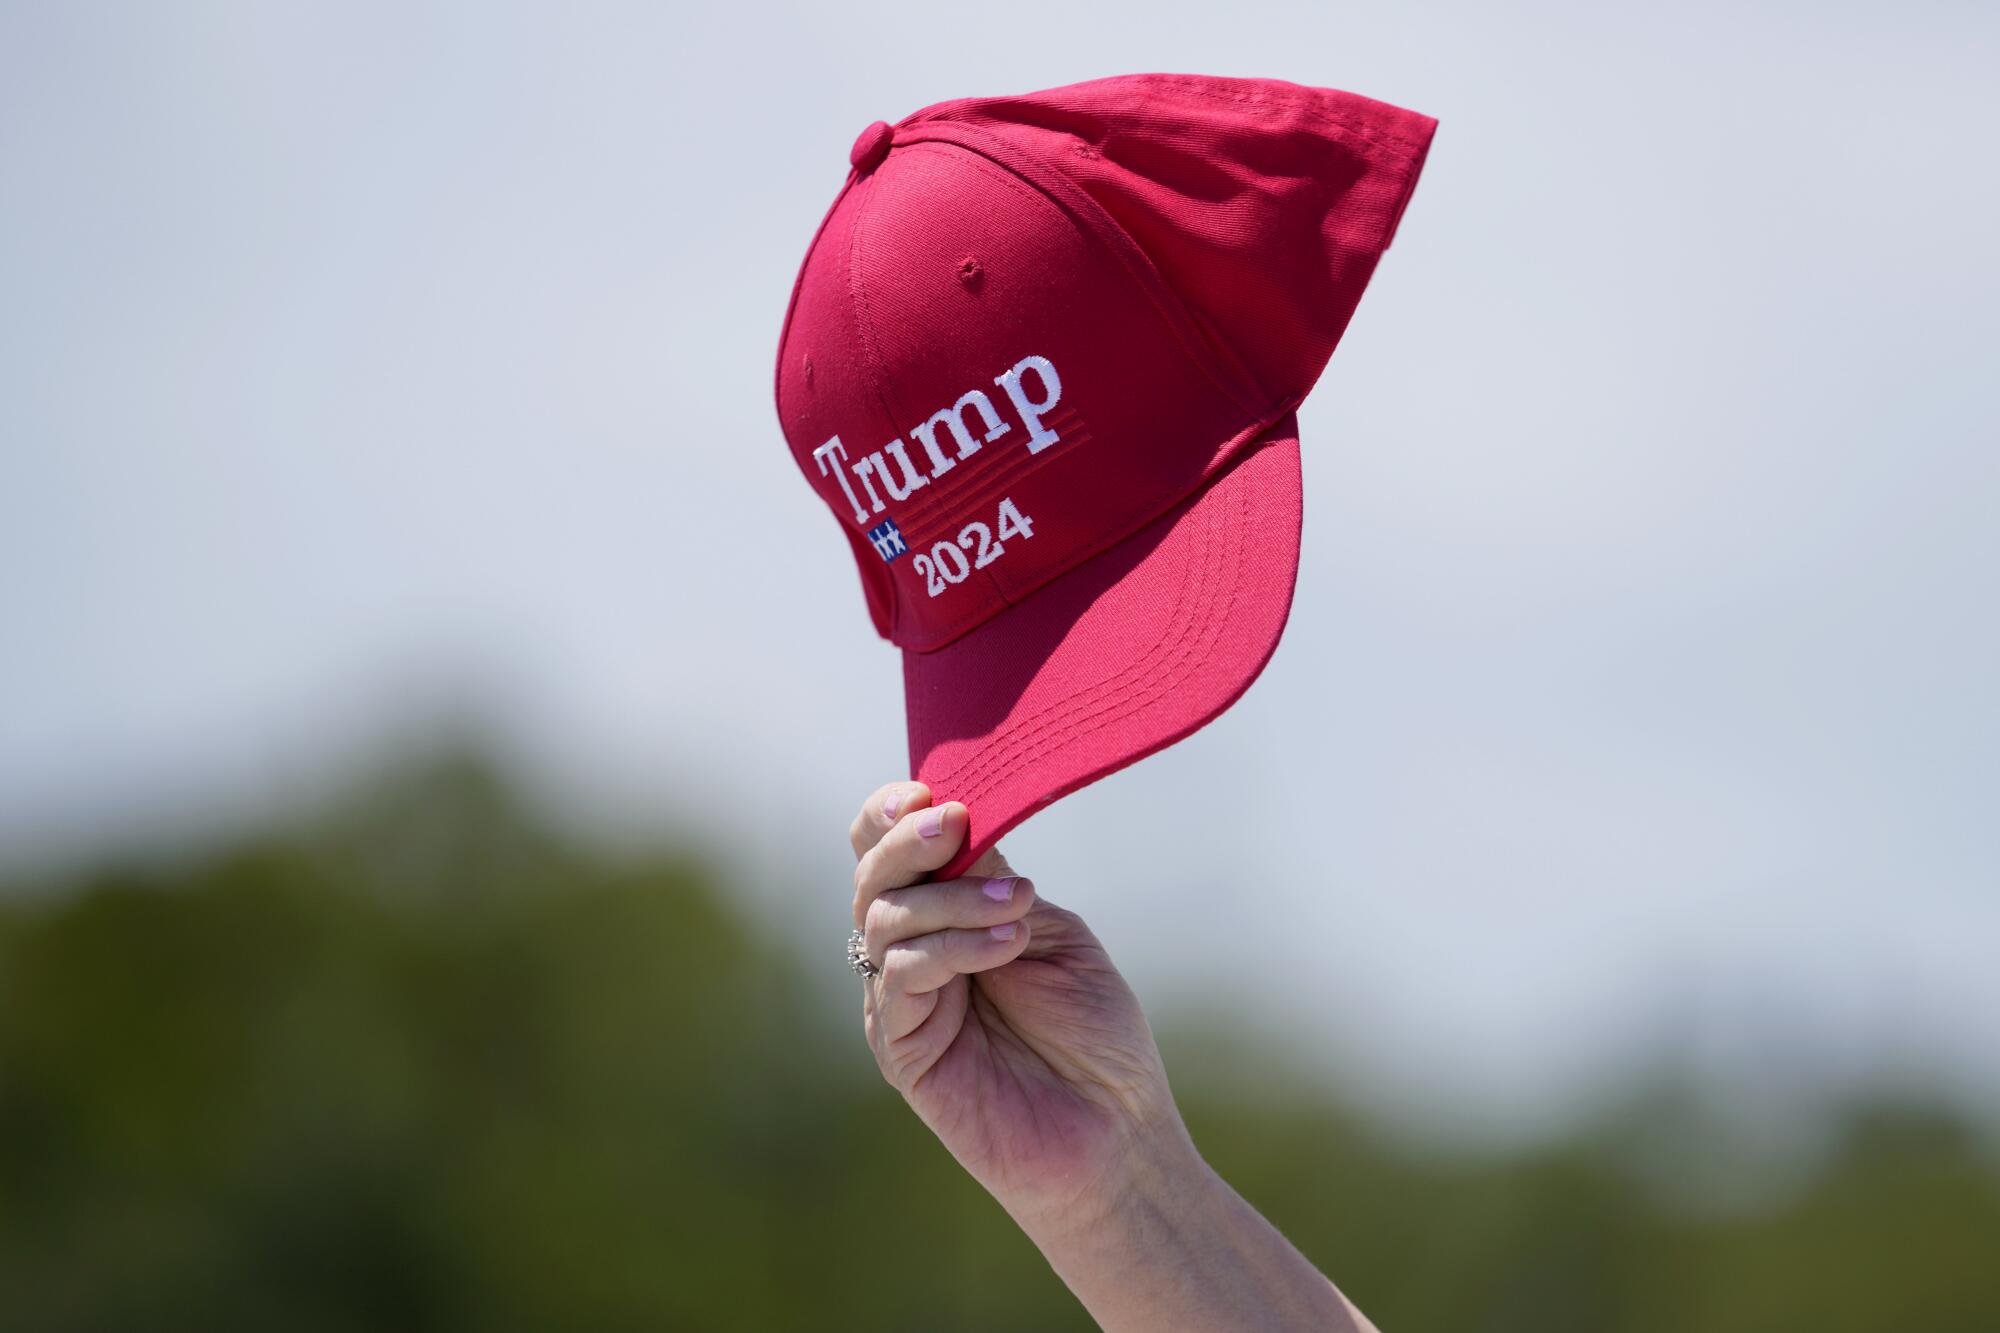 A supporter of former President Trump waves a Trump 2024 hat in the air.